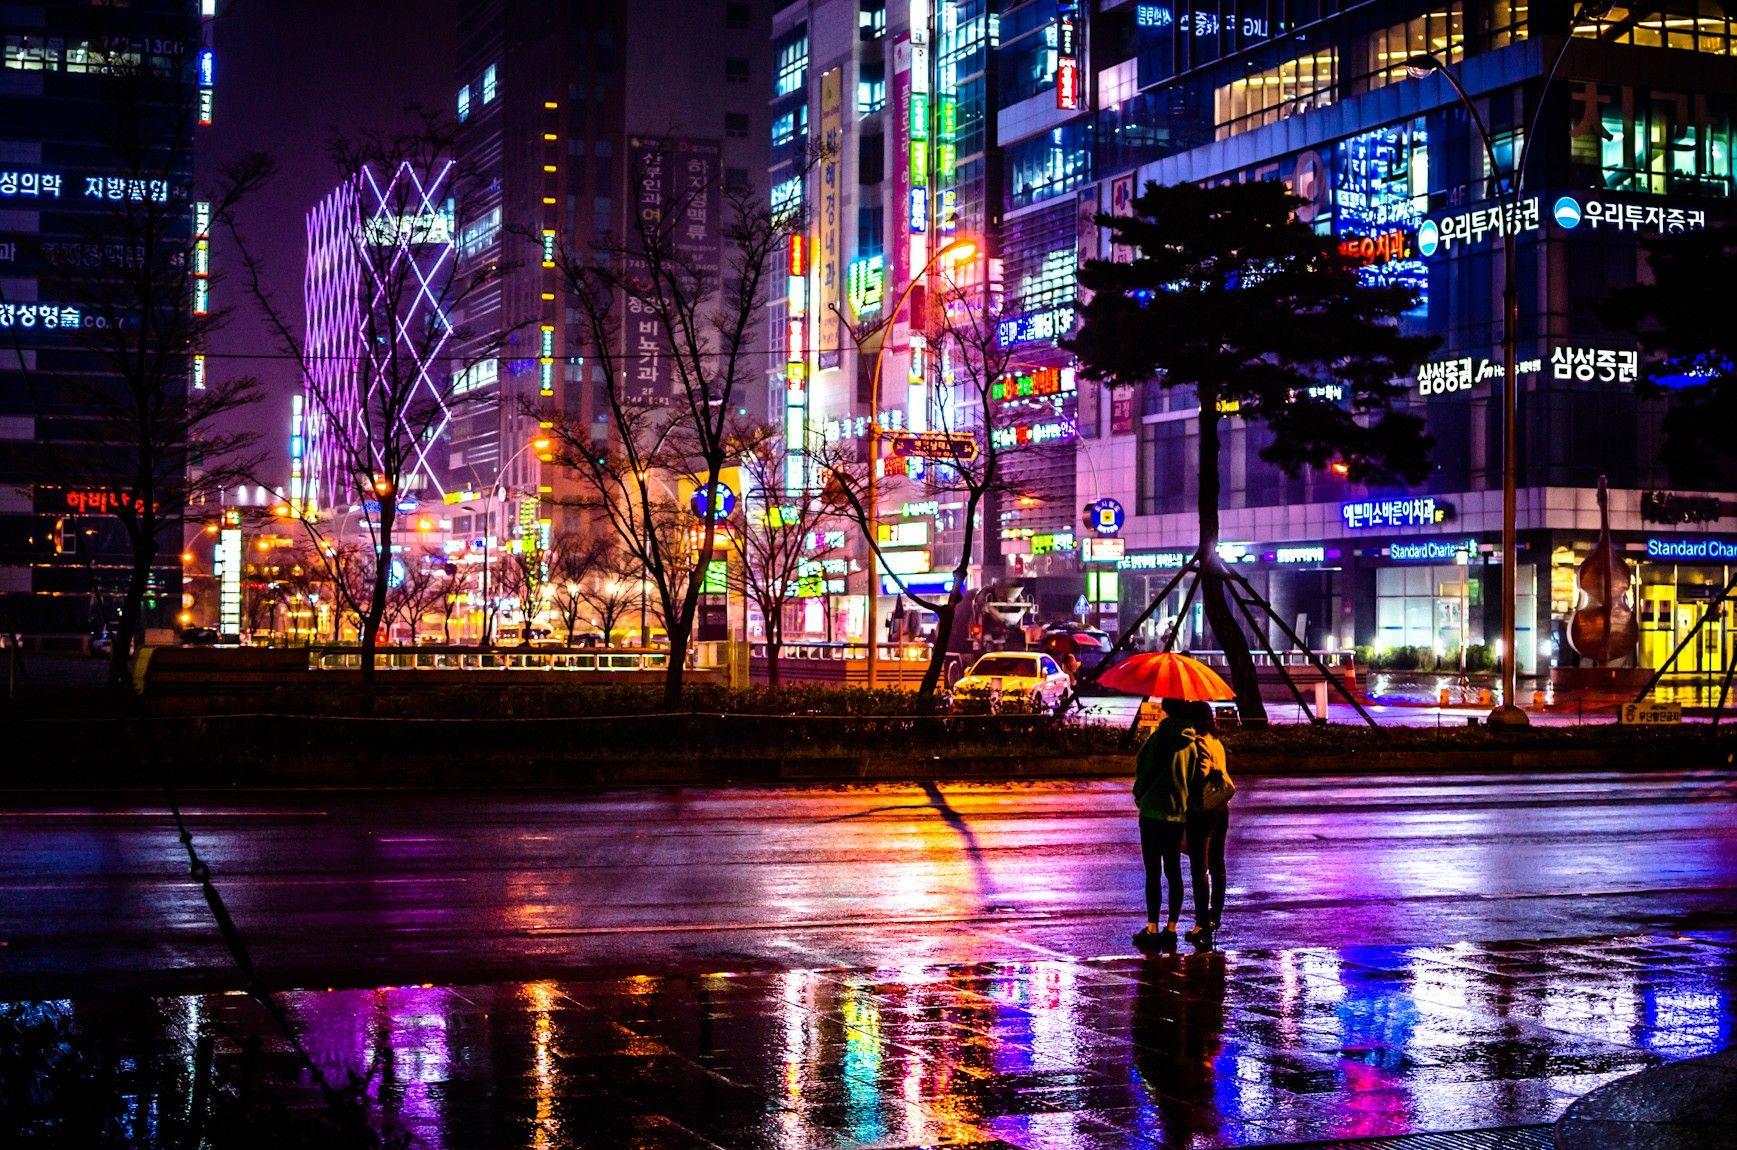 Seoul Street Wallpapers - Top Free Seoul Street Backgrounds